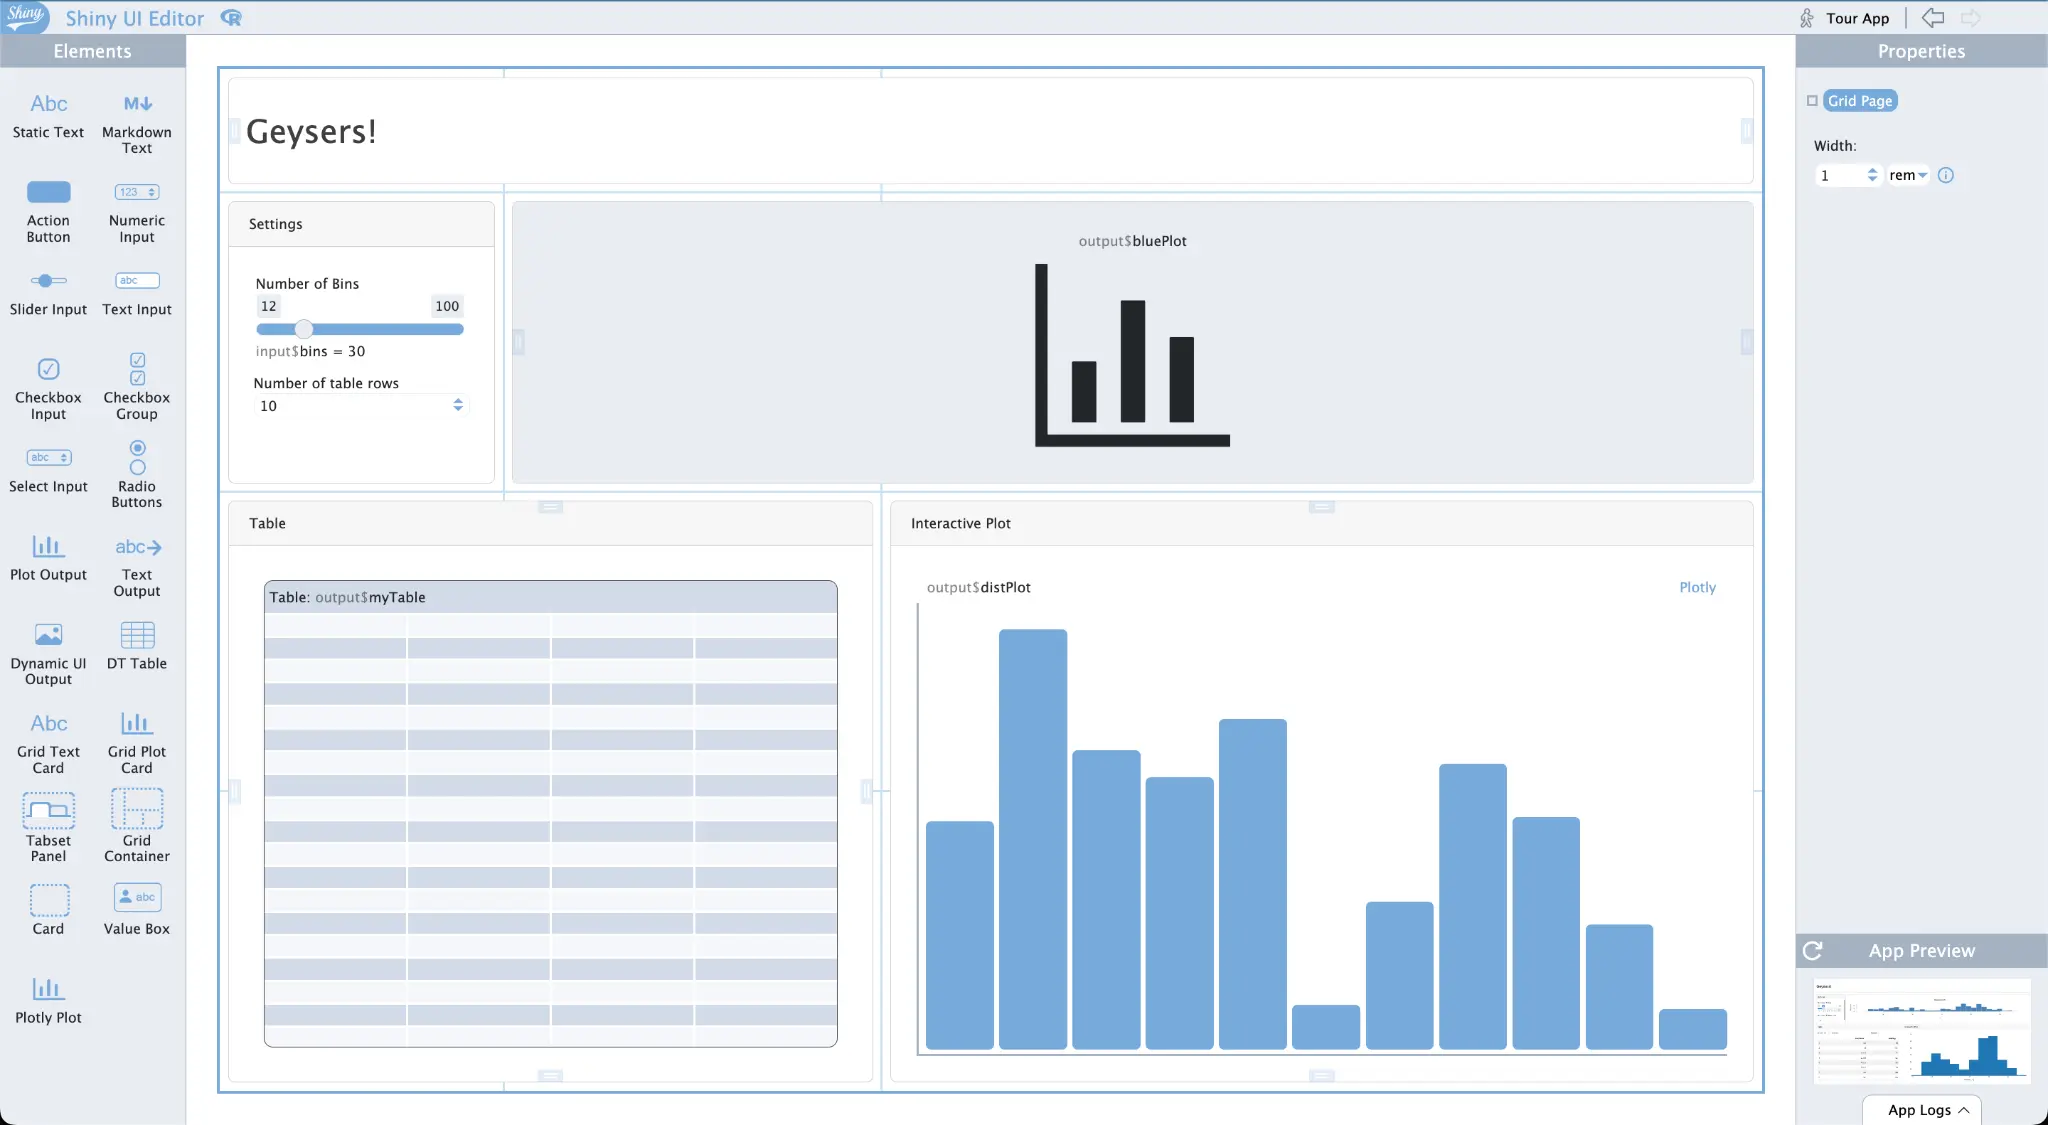 The user interface for ShinyUiEditor for creating data visualizations.